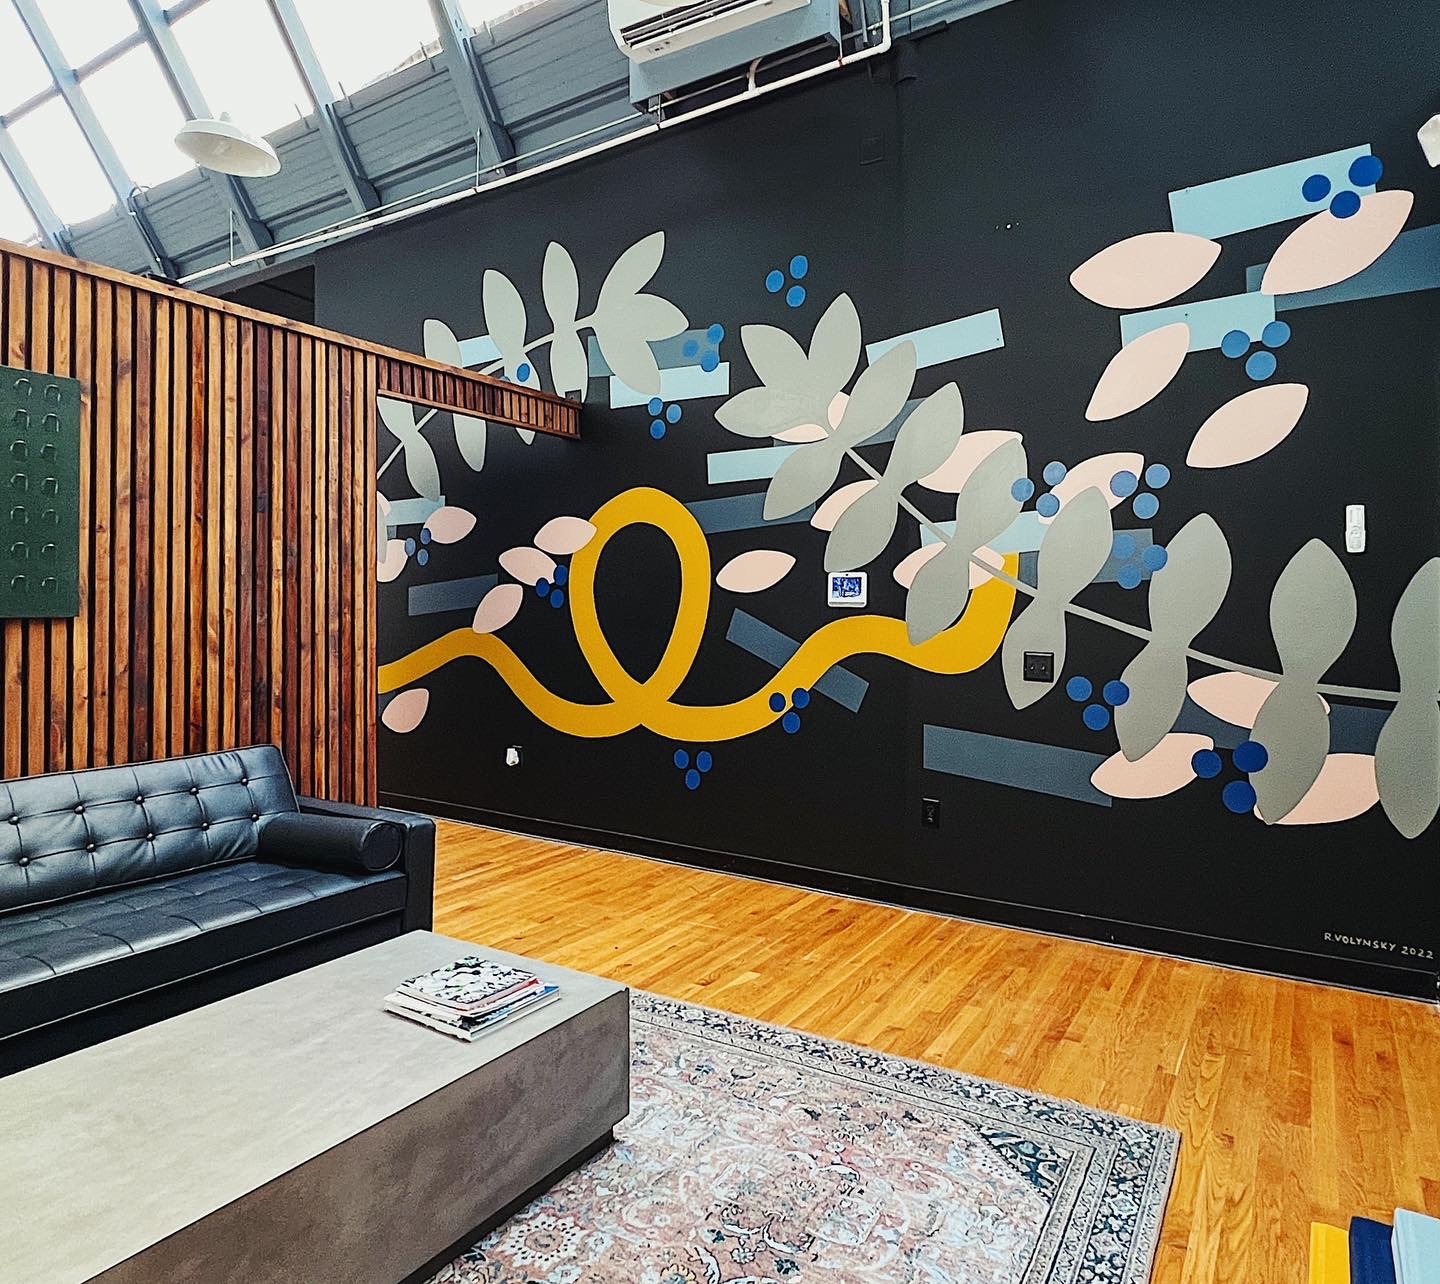  Commissioned mural for  Move Mountains, Co.  in Pawtucket, Rhode Island. This piece was designed and painted by hand in October 2022. 